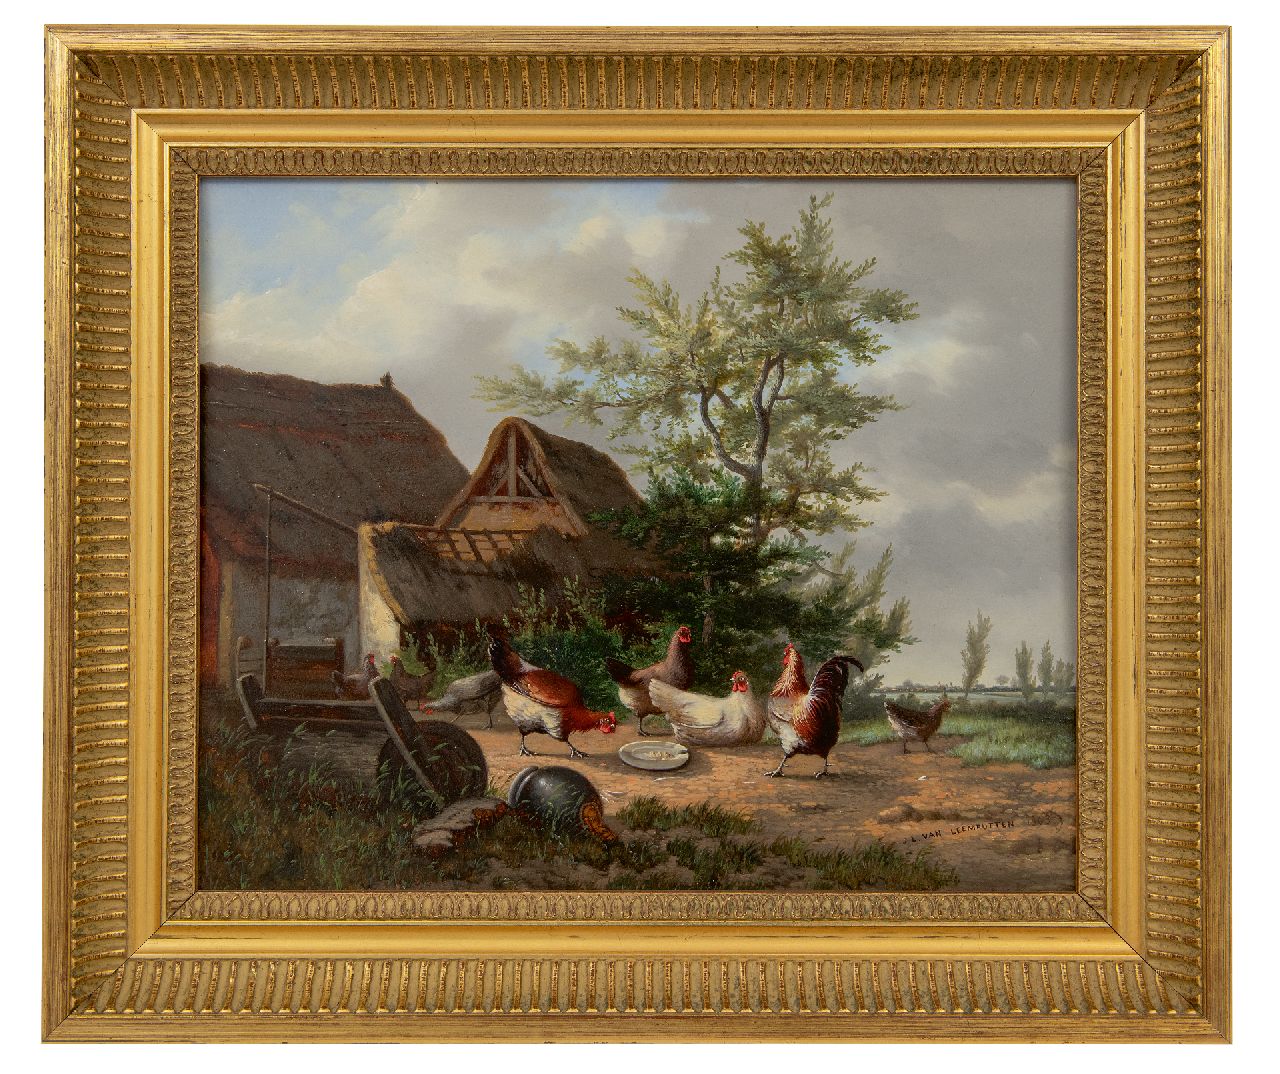 Leemputten J.L. van | Jean-Baptiste Leopold van Leemputten | Paintings offered for sale | Farmyard with rooster and chickens, oil on panel 28.1 x 33.7 cm, signed l.r. and dated 1863